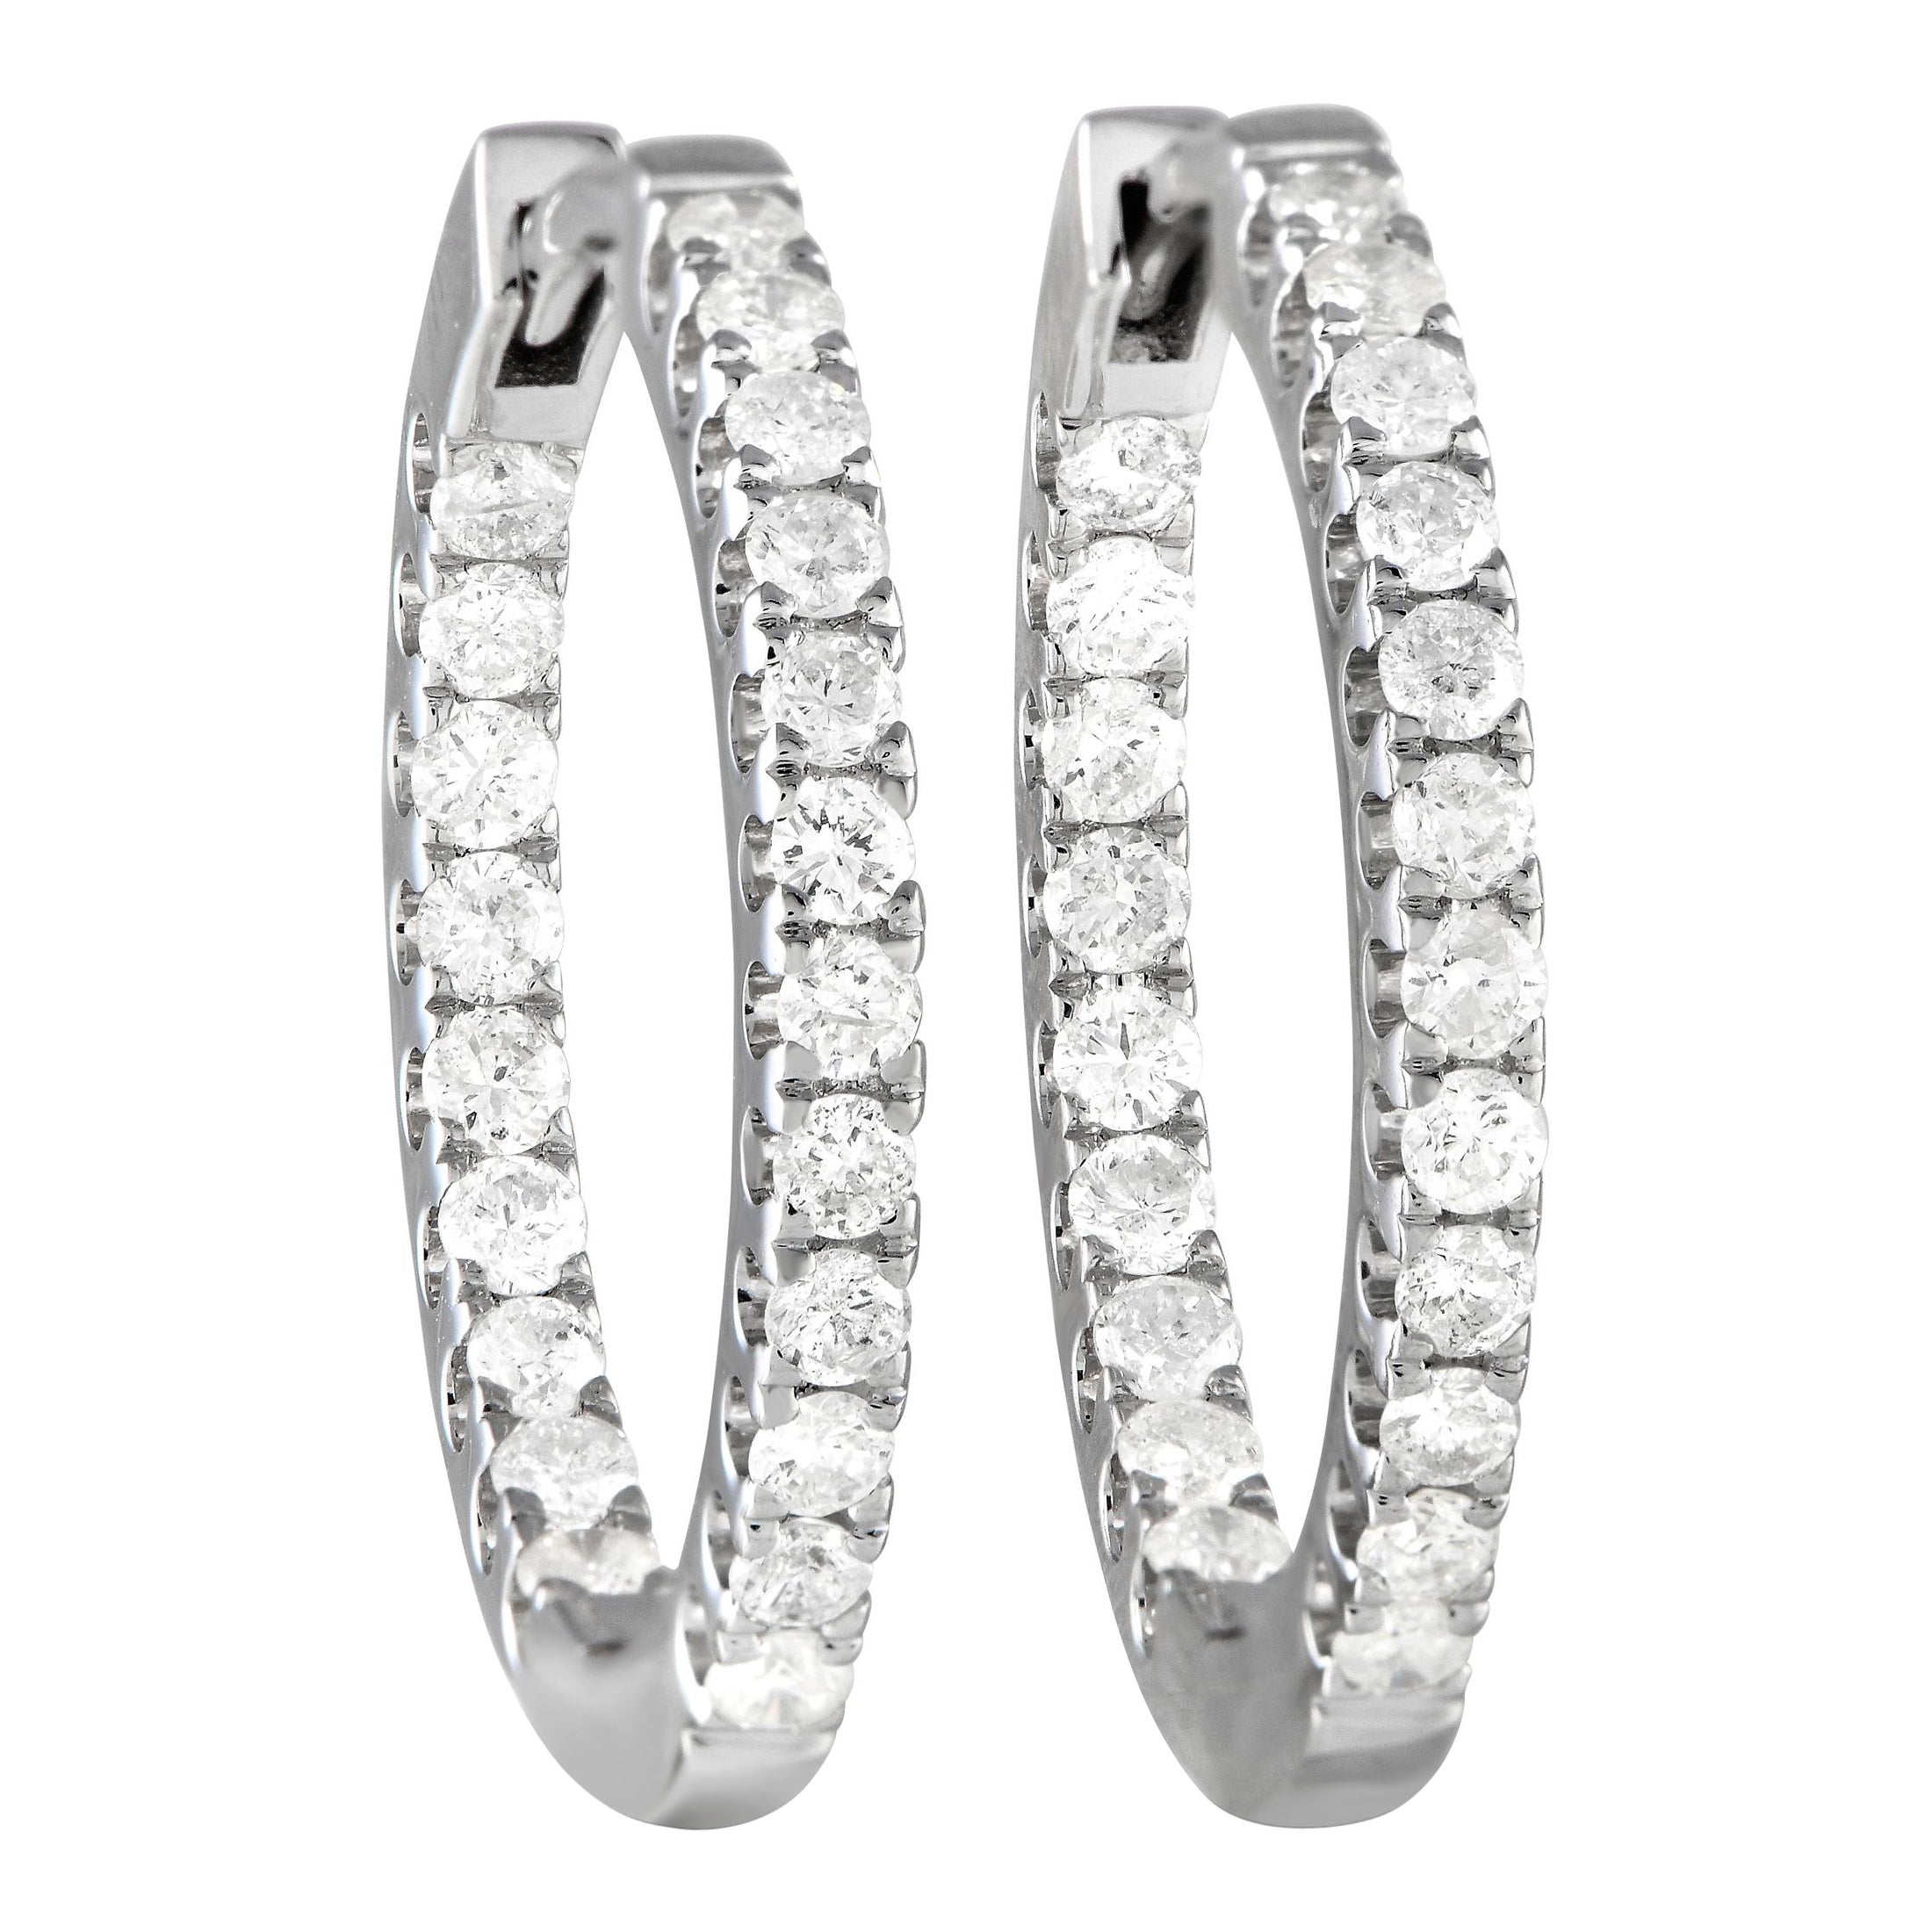 LB Exclusive 14K White Gold 1.0ct Diamond Inside-Out Hoop Earrings For Sale